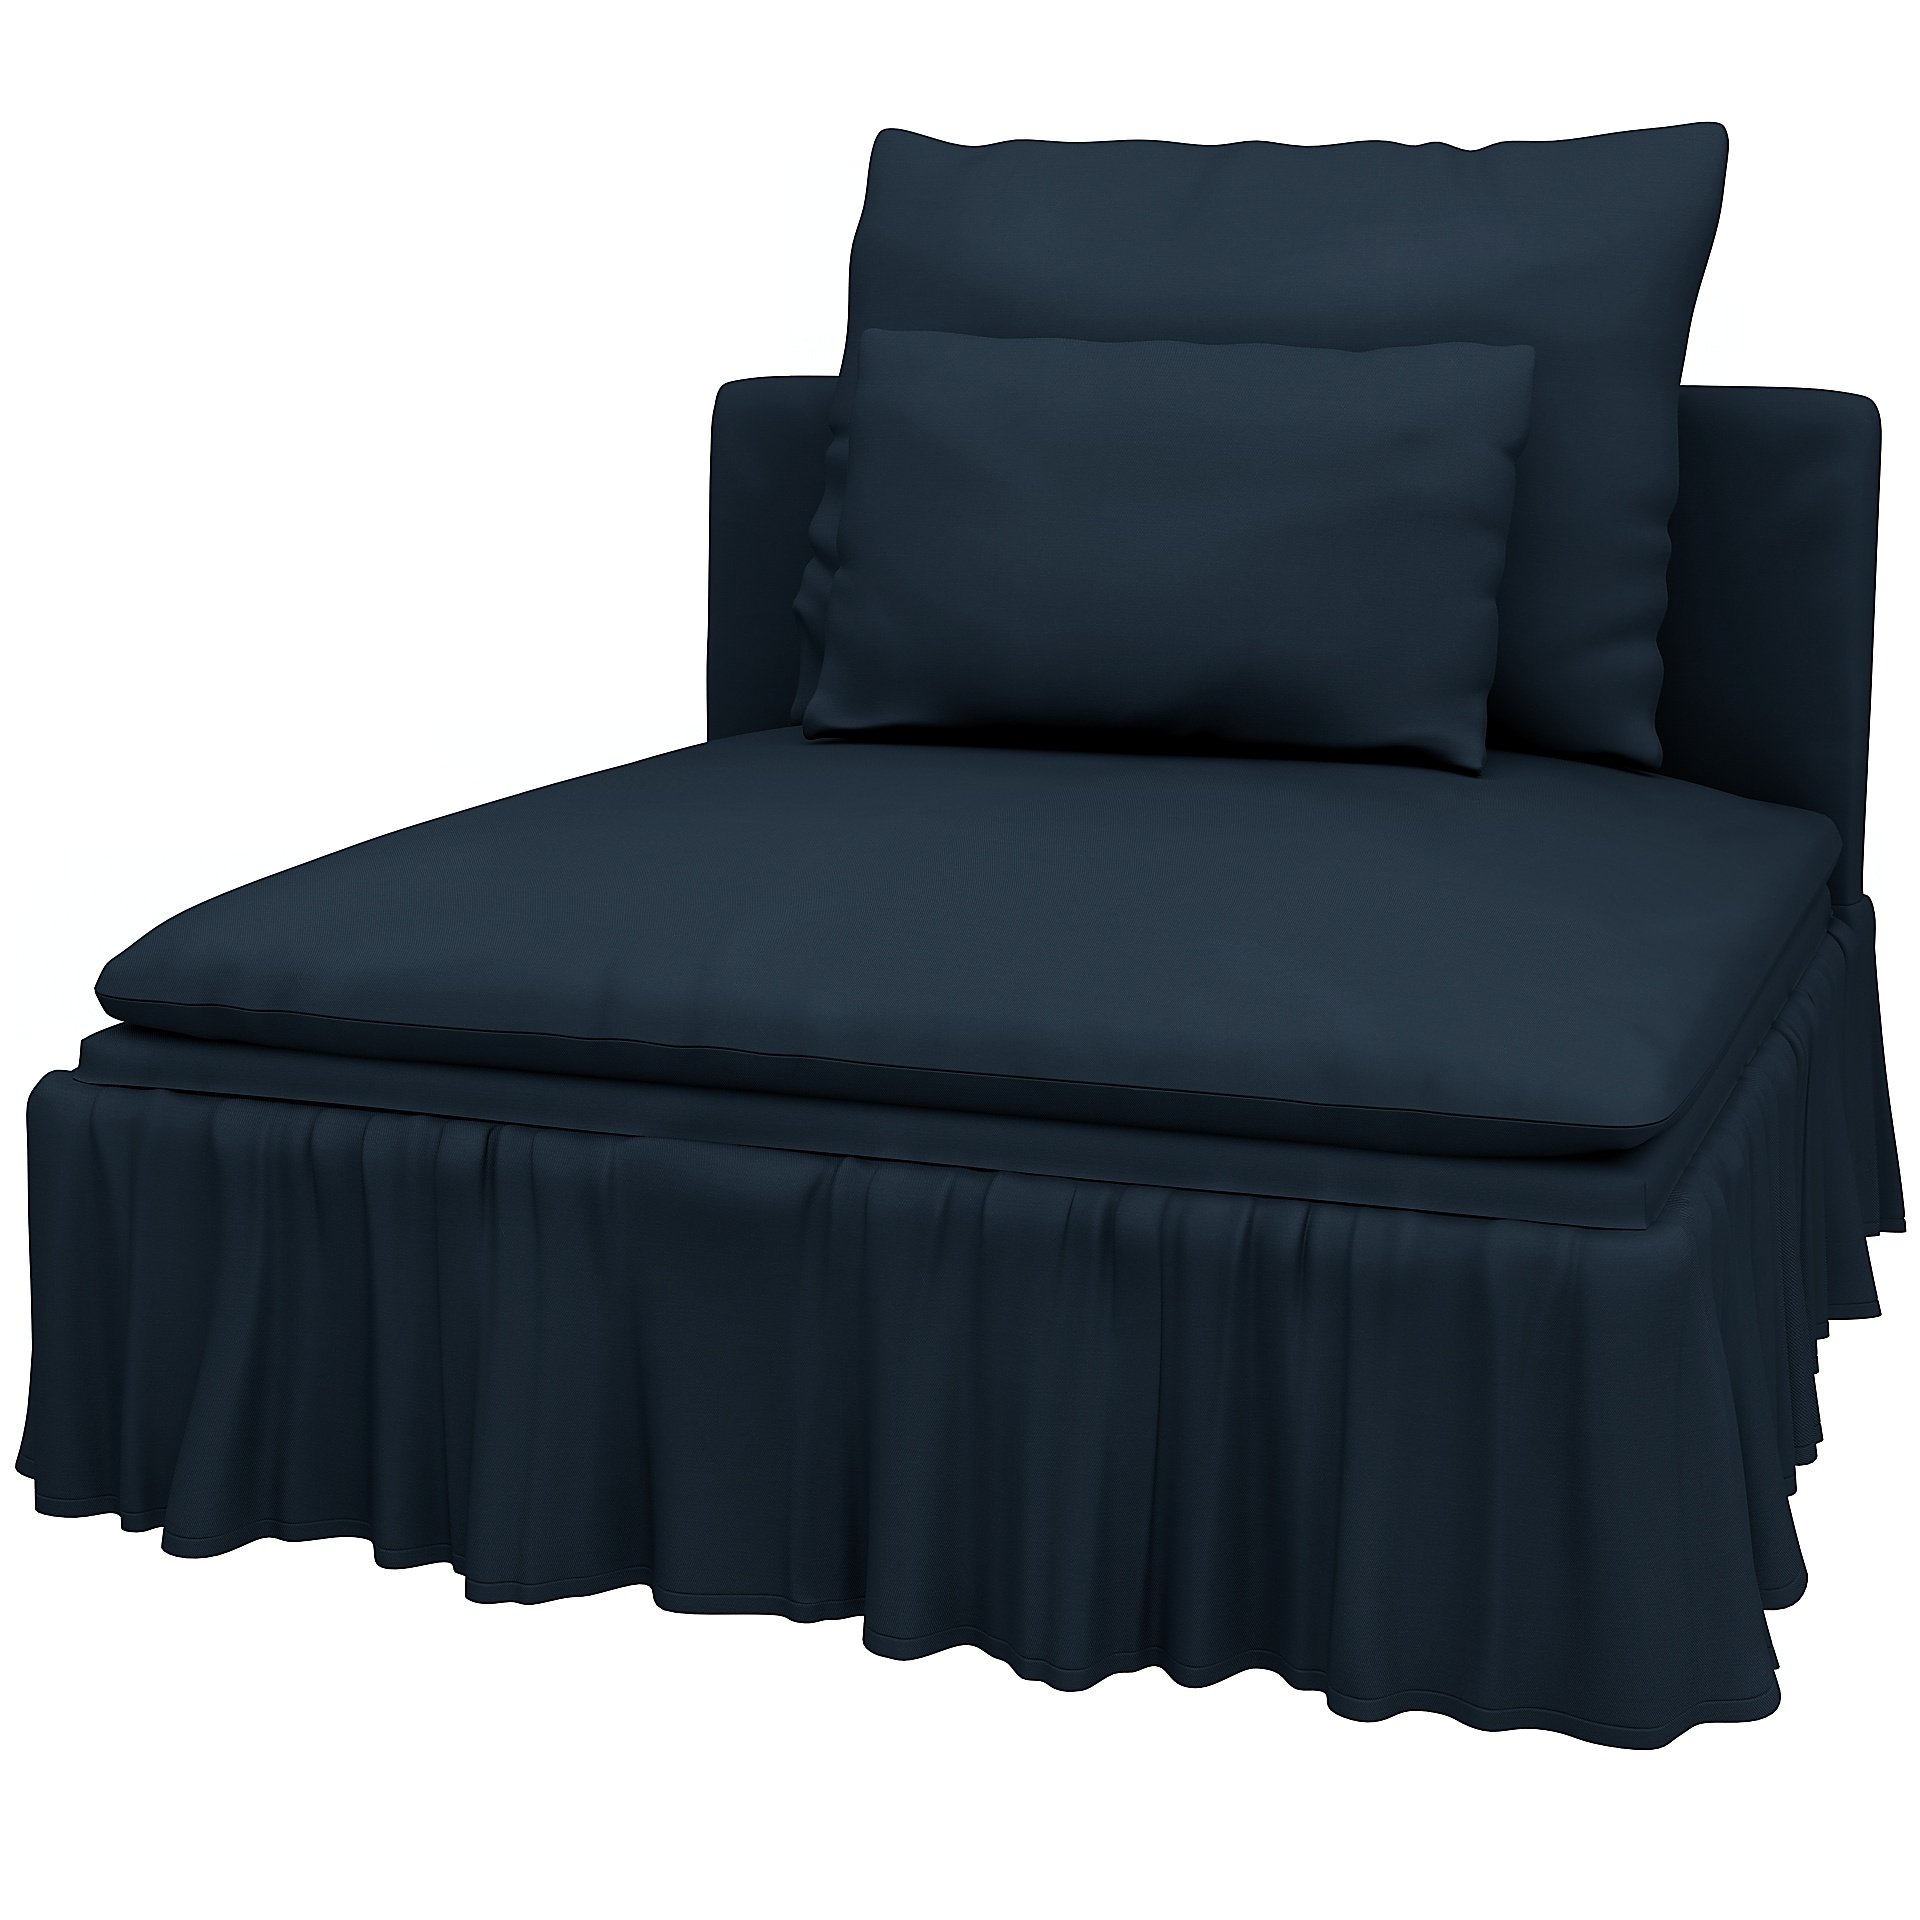 IKEA - Soderhamn 1 seat section cover Maximalist Fit, Navy Blue, Cotton - Bemz